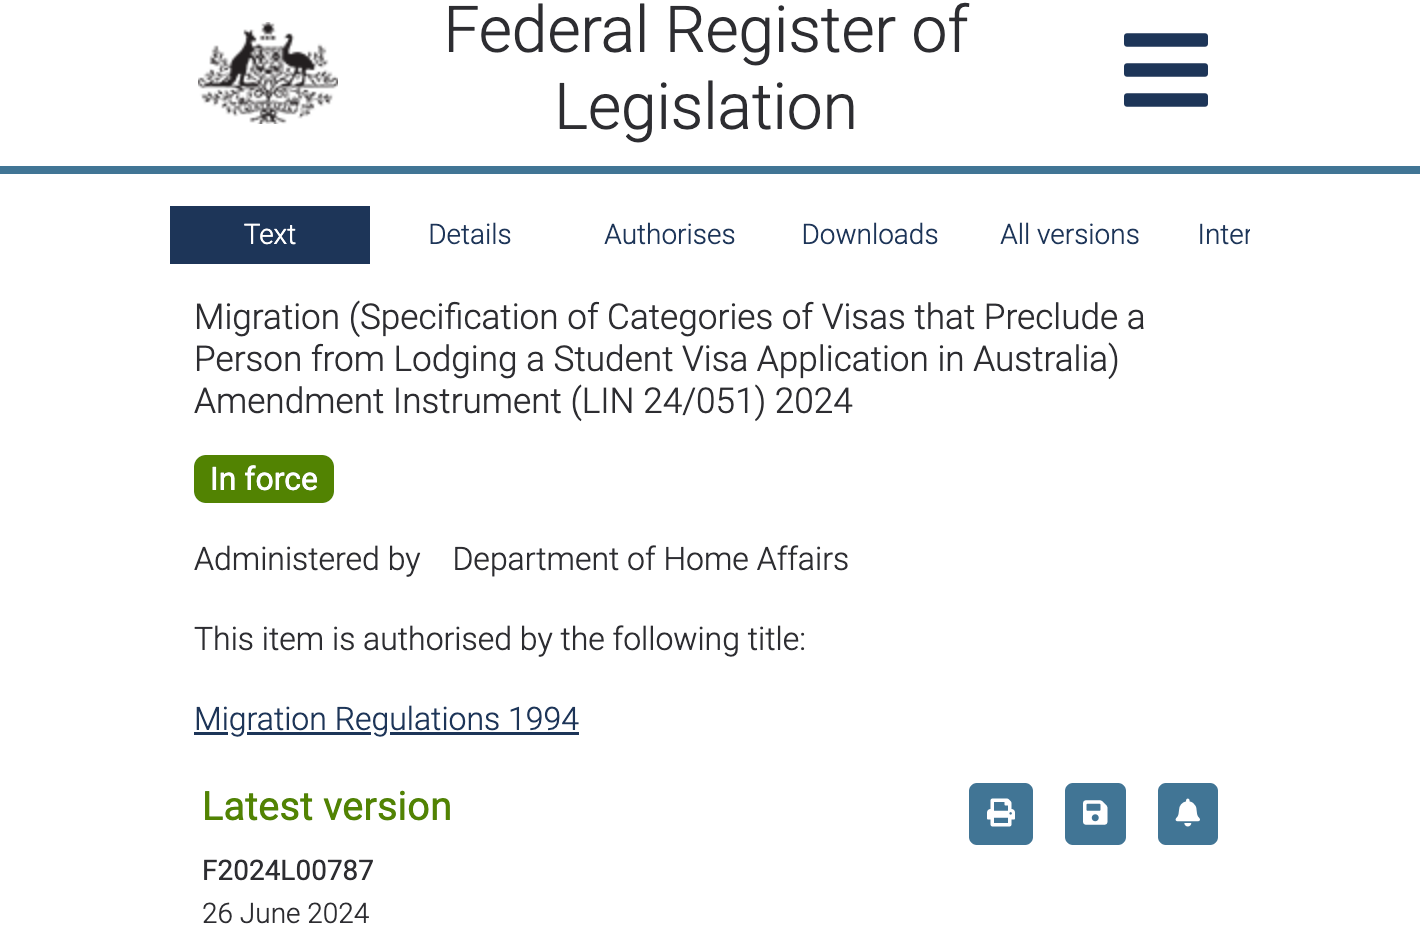 Eligibility Restrictions for Applicants Residing in Australia